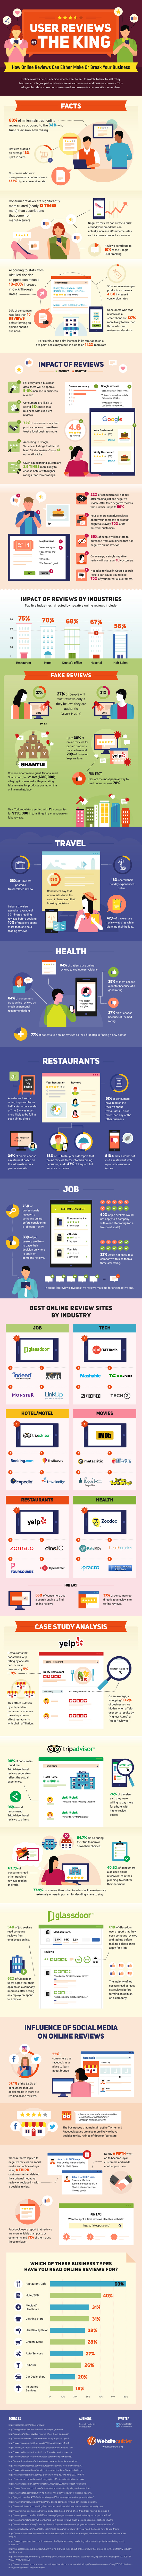 Online User Reviews Infographic